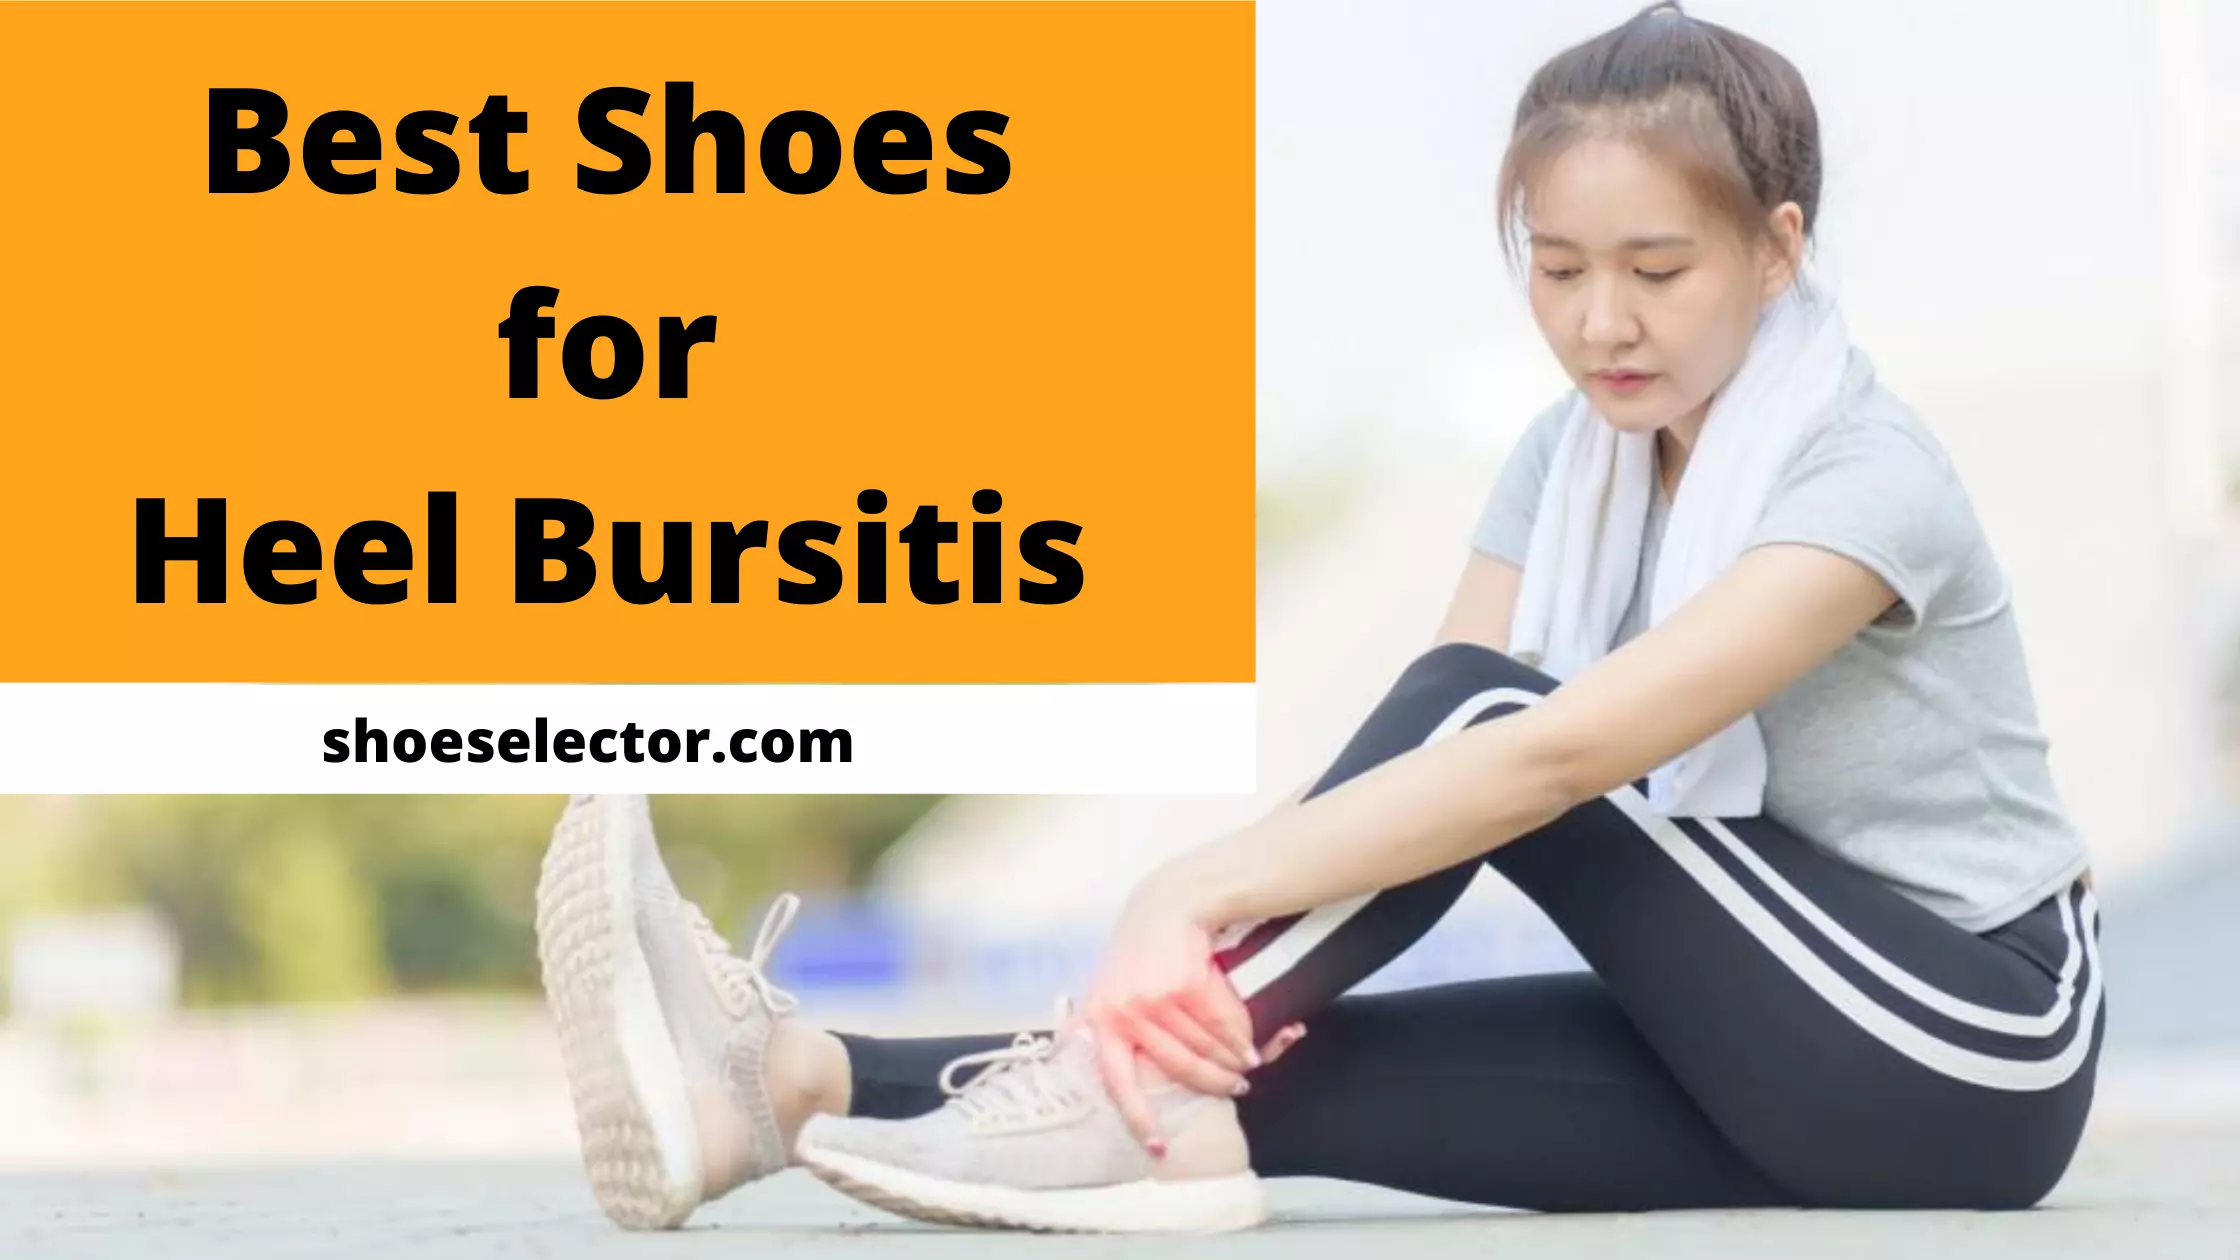 Best Shoes for Heel Bursitis - Tested By Experts